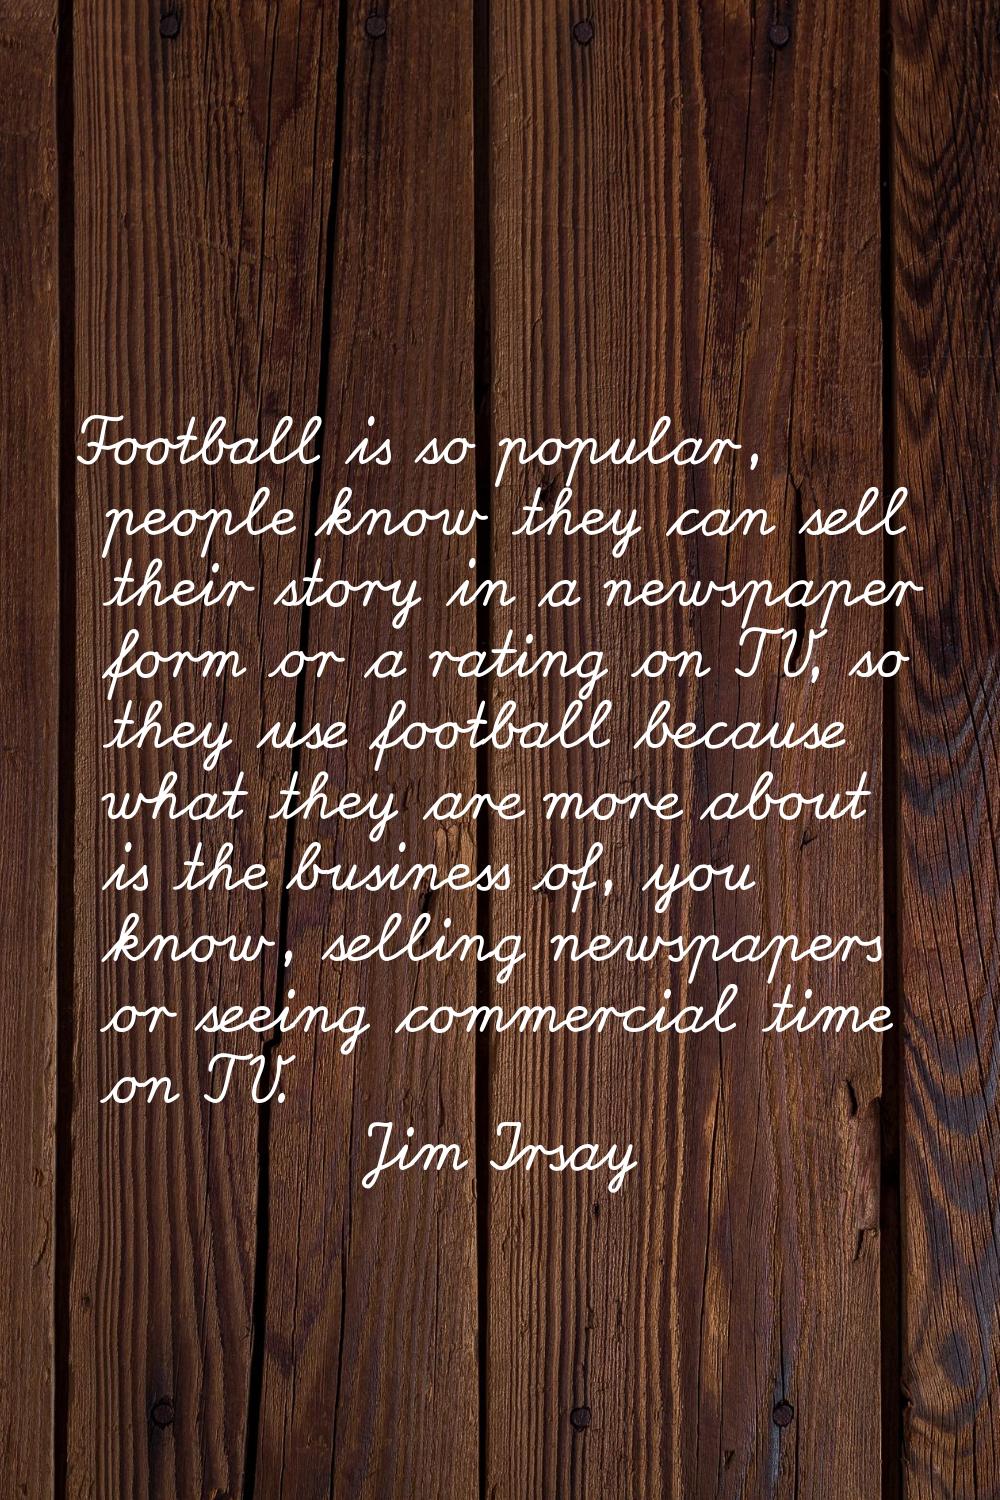 Football is so popular, people know they can sell their story in a newspaper form or a rating on TV